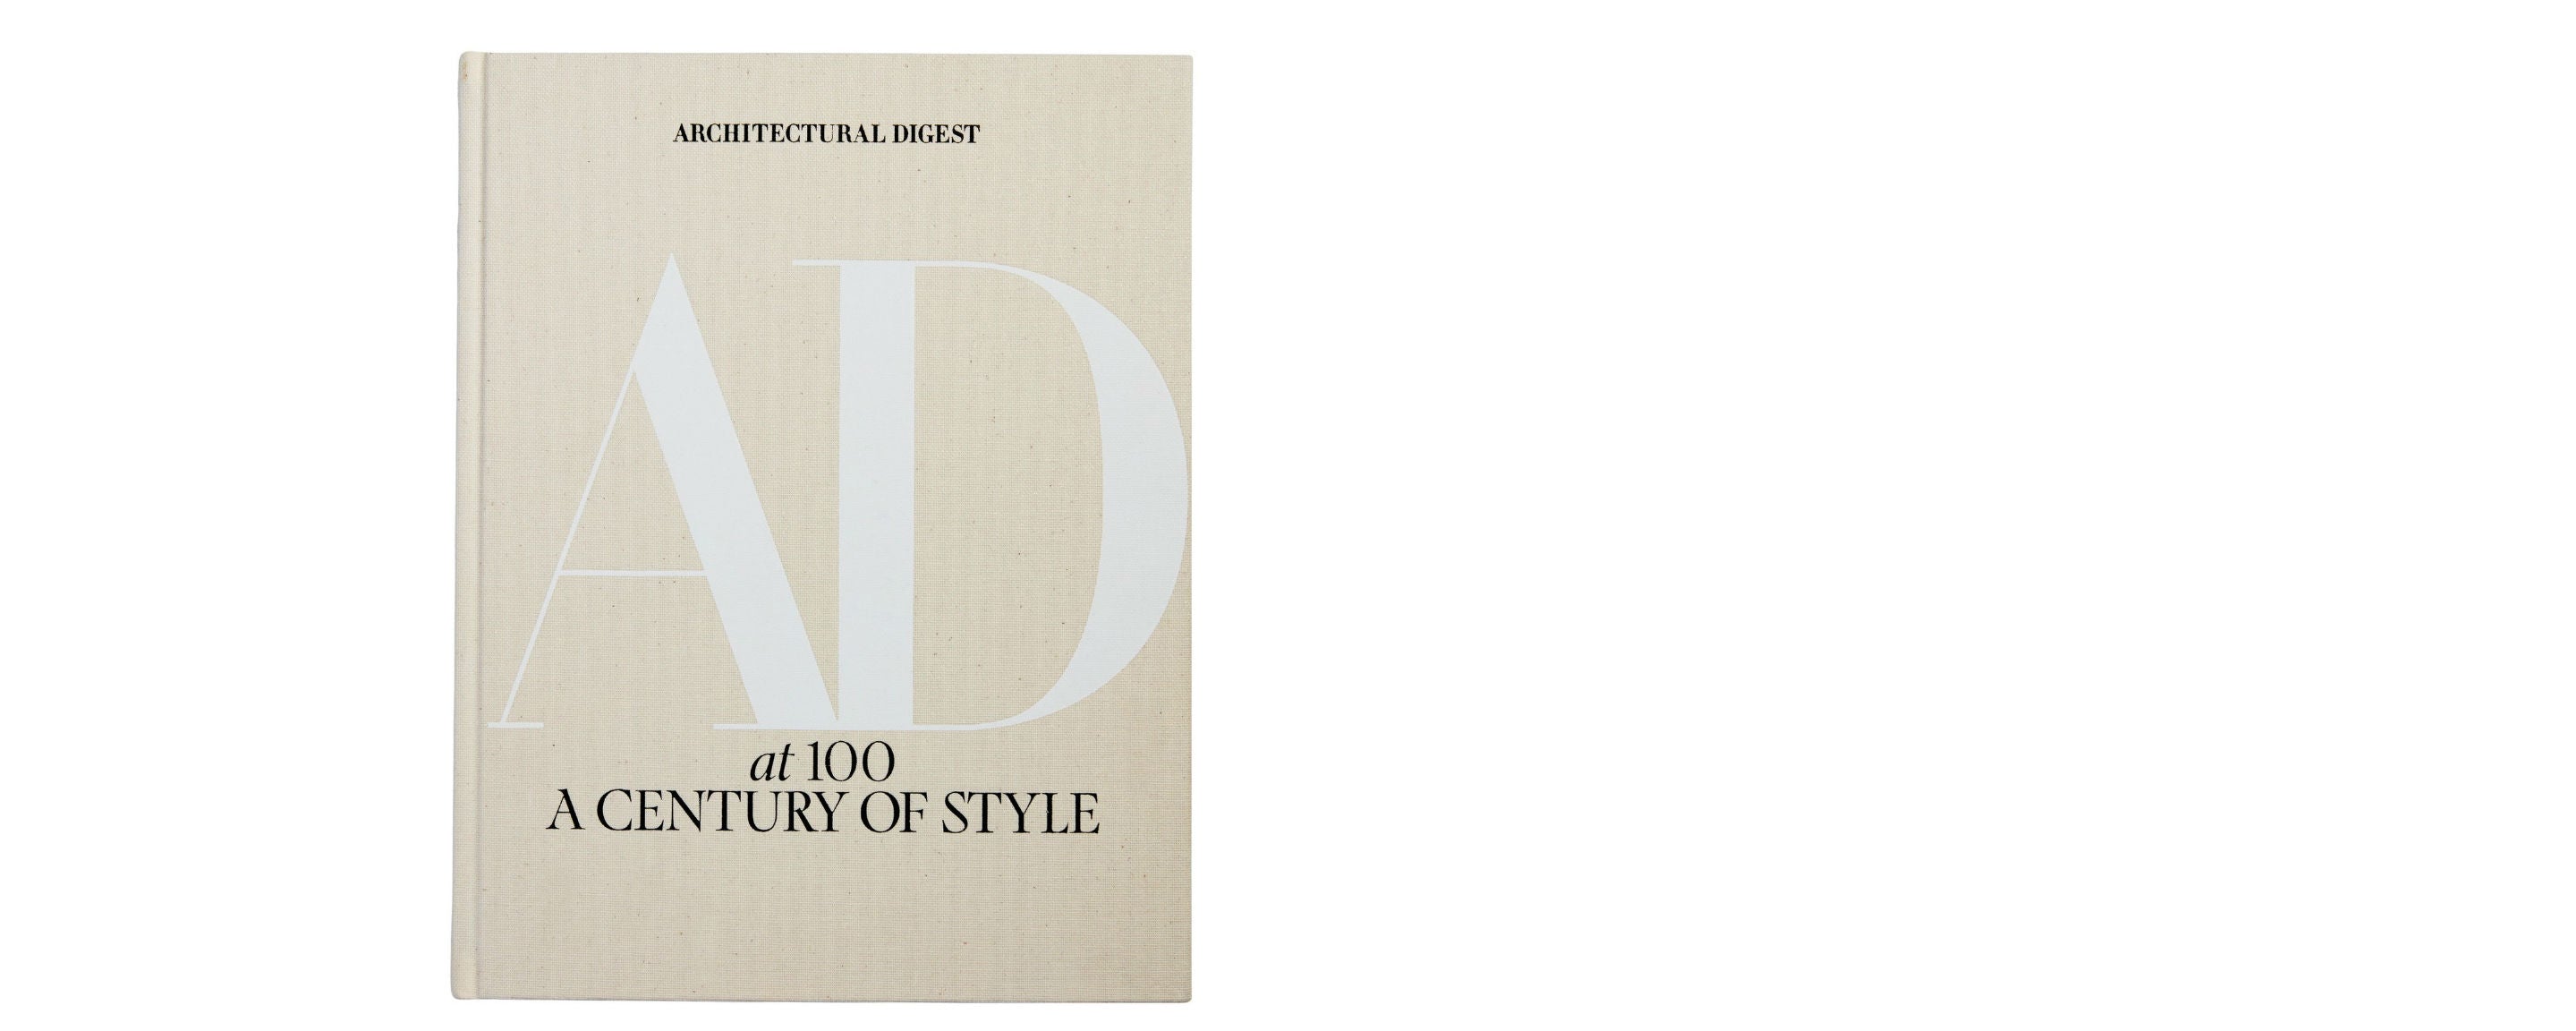 Architectural Digest at 100: A Century of Style by Architectural Digest,  Hardcover